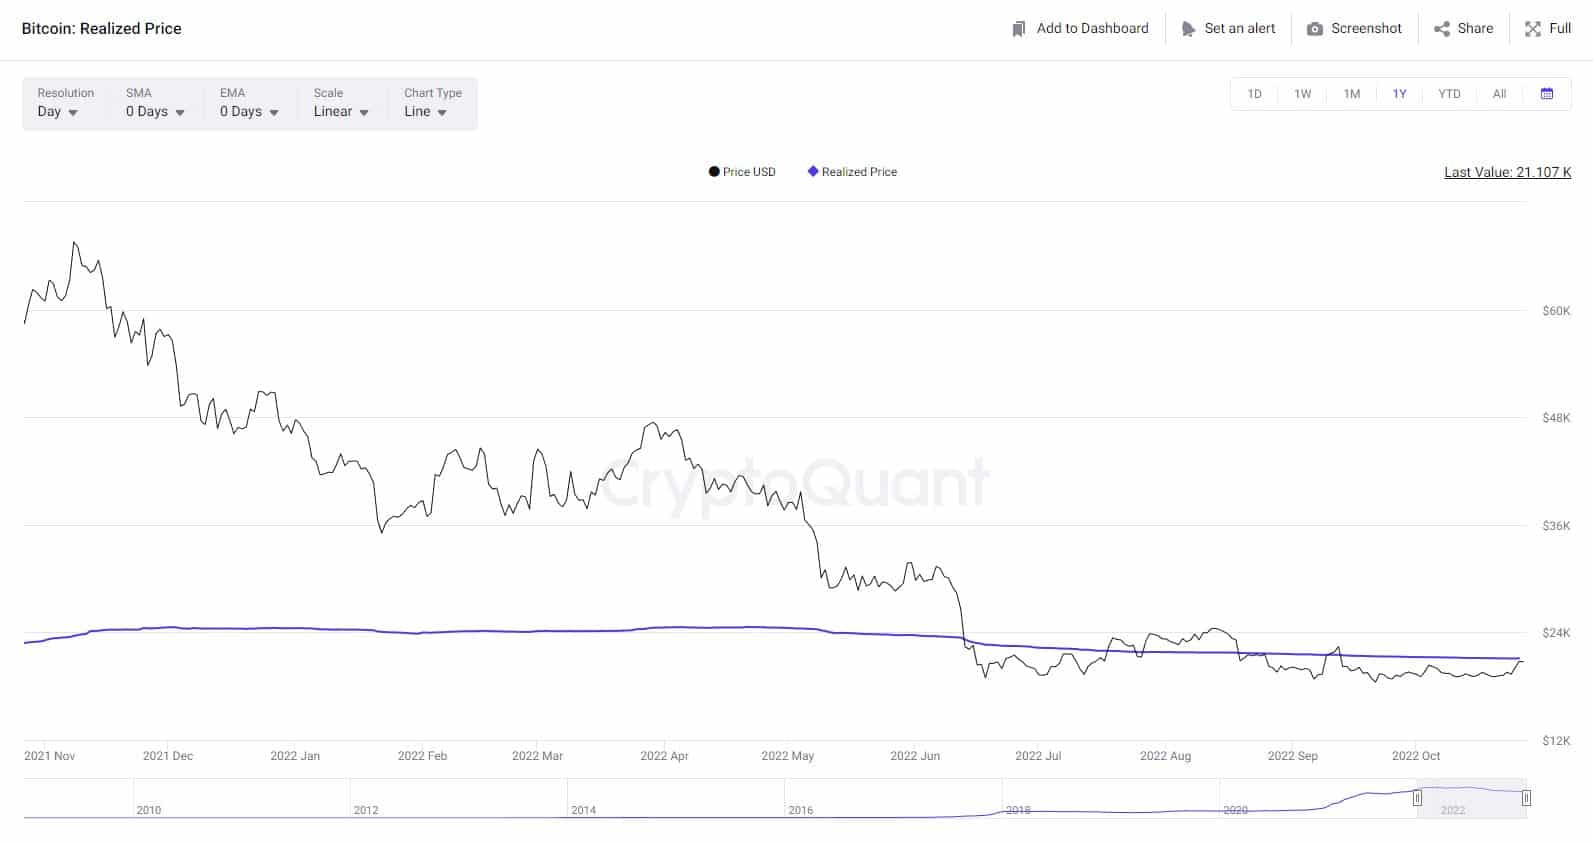 Two Things to Watch in Bitcoin’s Price Following the Recent Pump